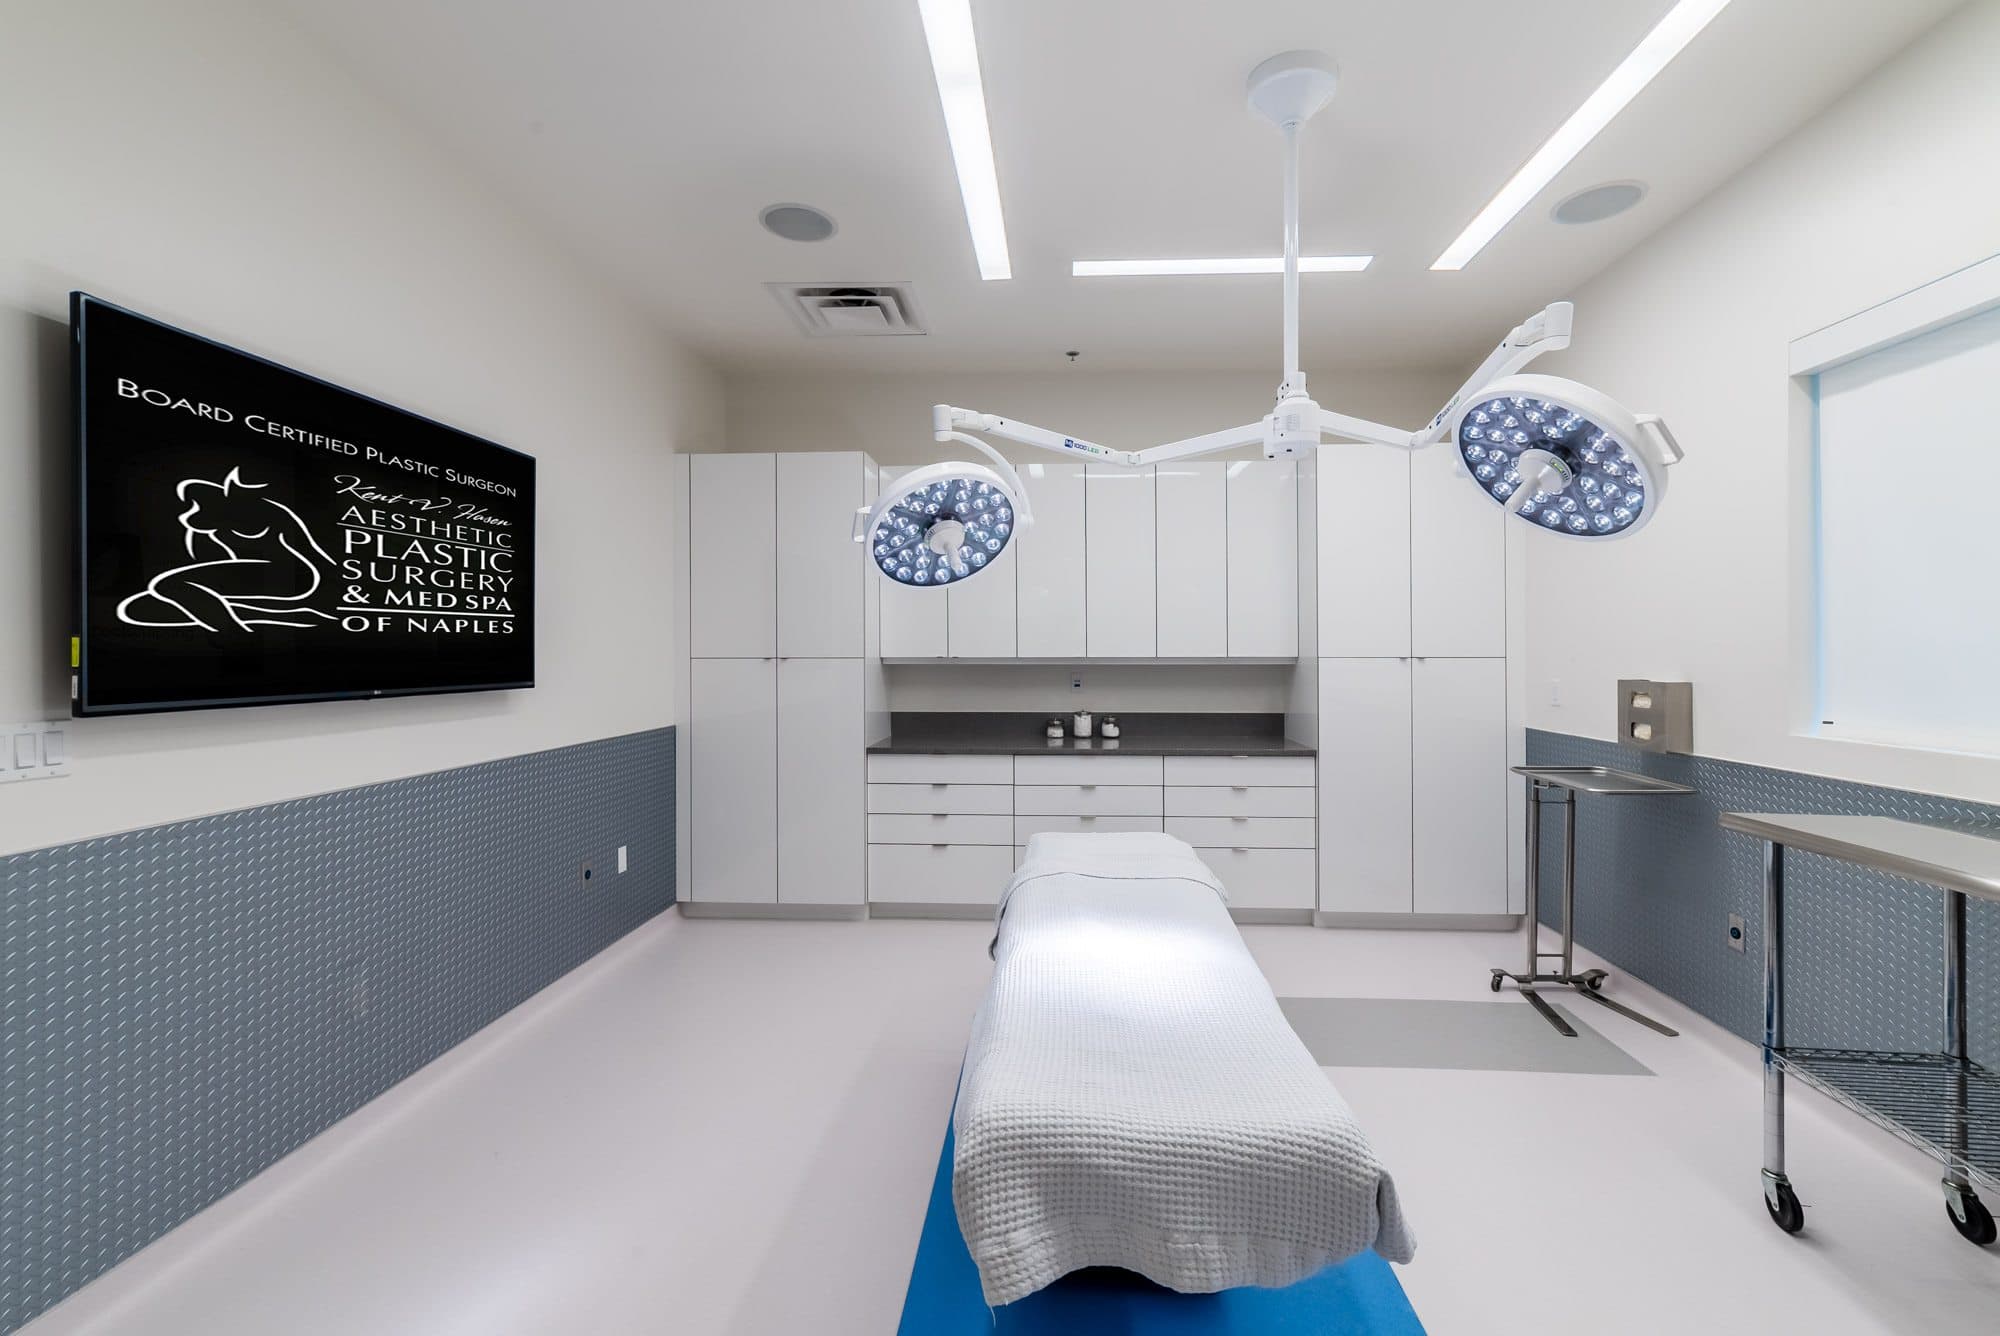 Surgery Center operating room